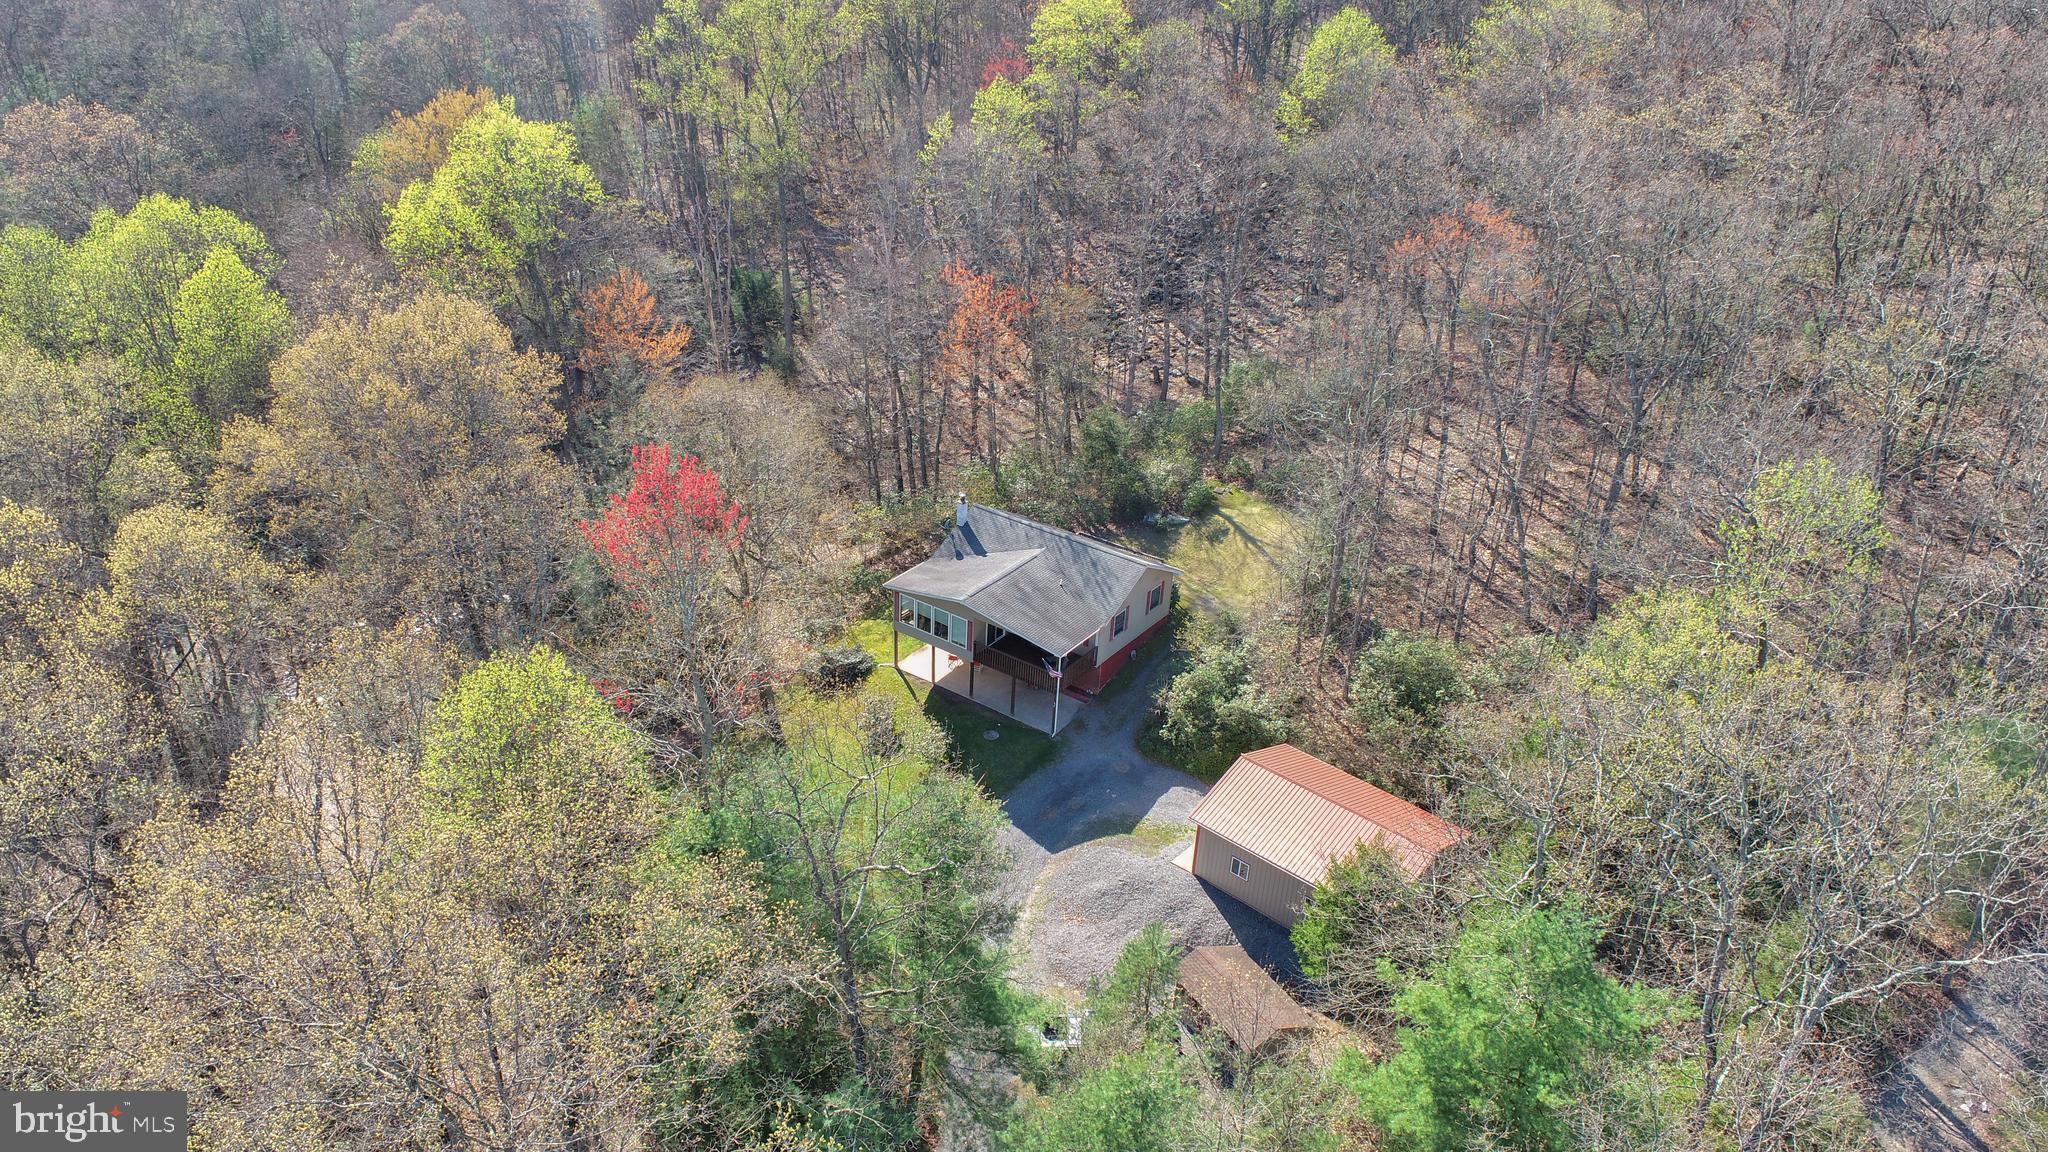 a aerial view of a house with a yard and tree s